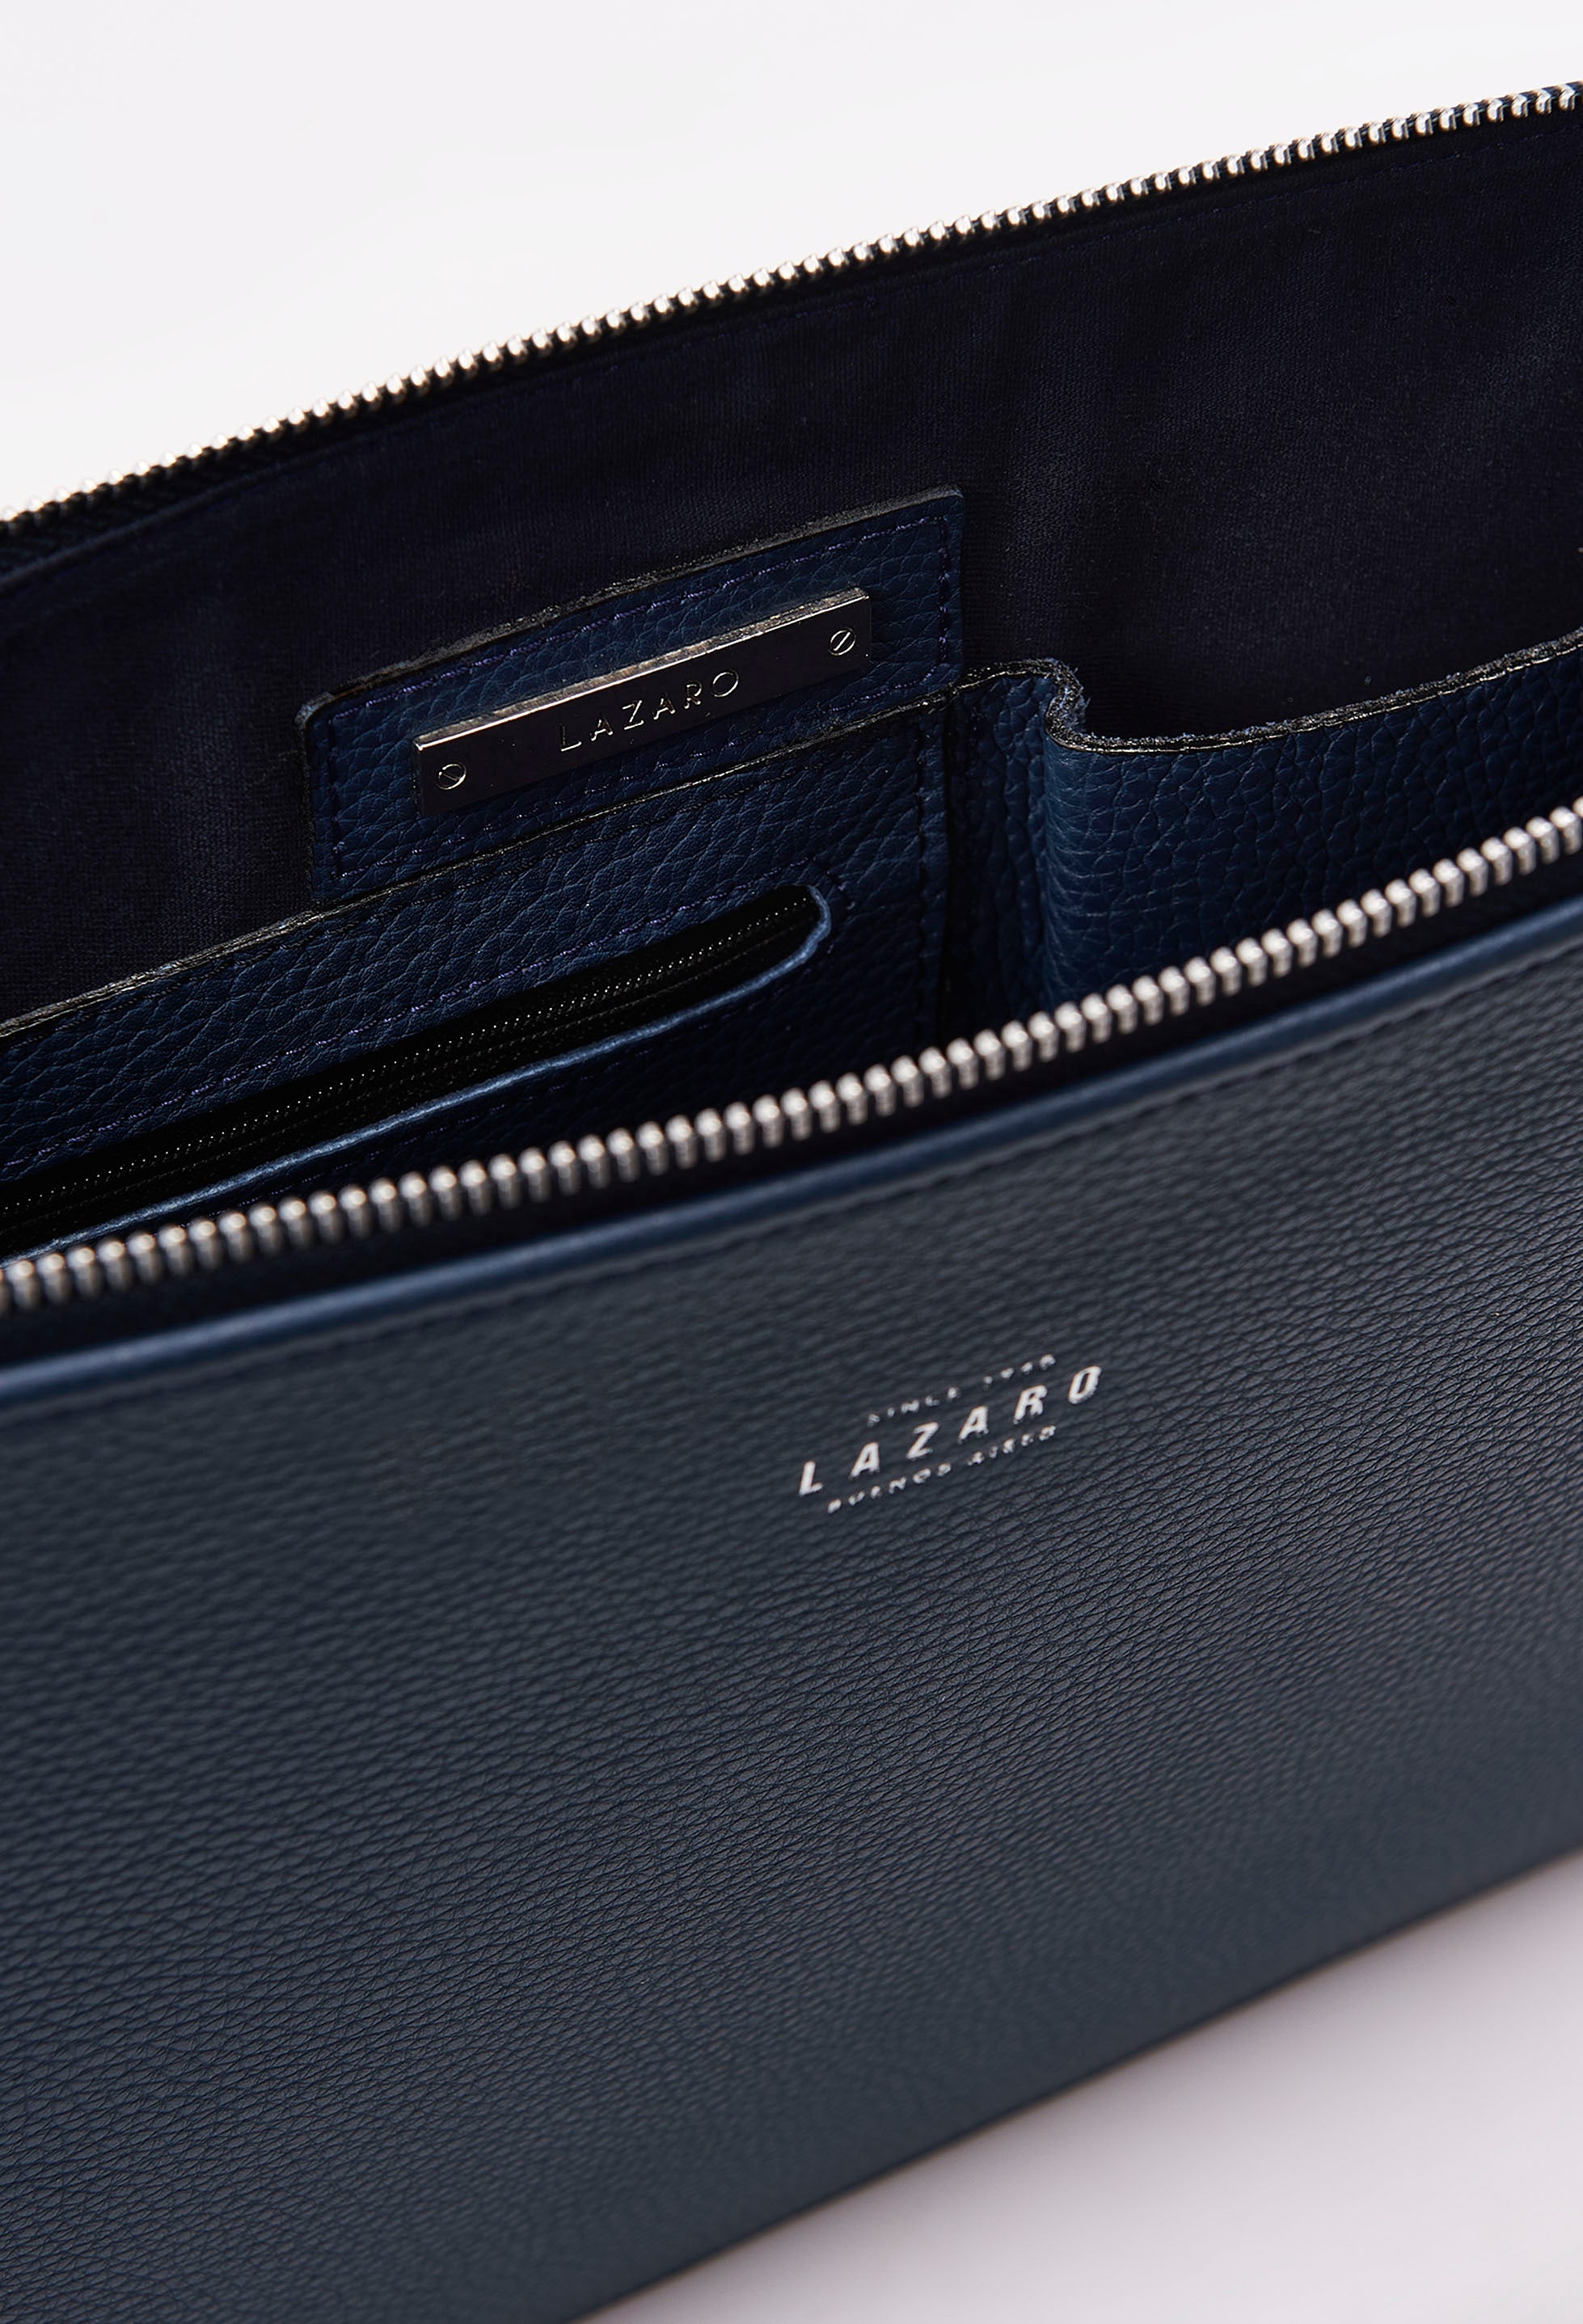 Partial photo of a Blue Leather Slim Computer Case showing its main zippered compartment, internal multifunctional pockets and Lazaro silver ironwork.